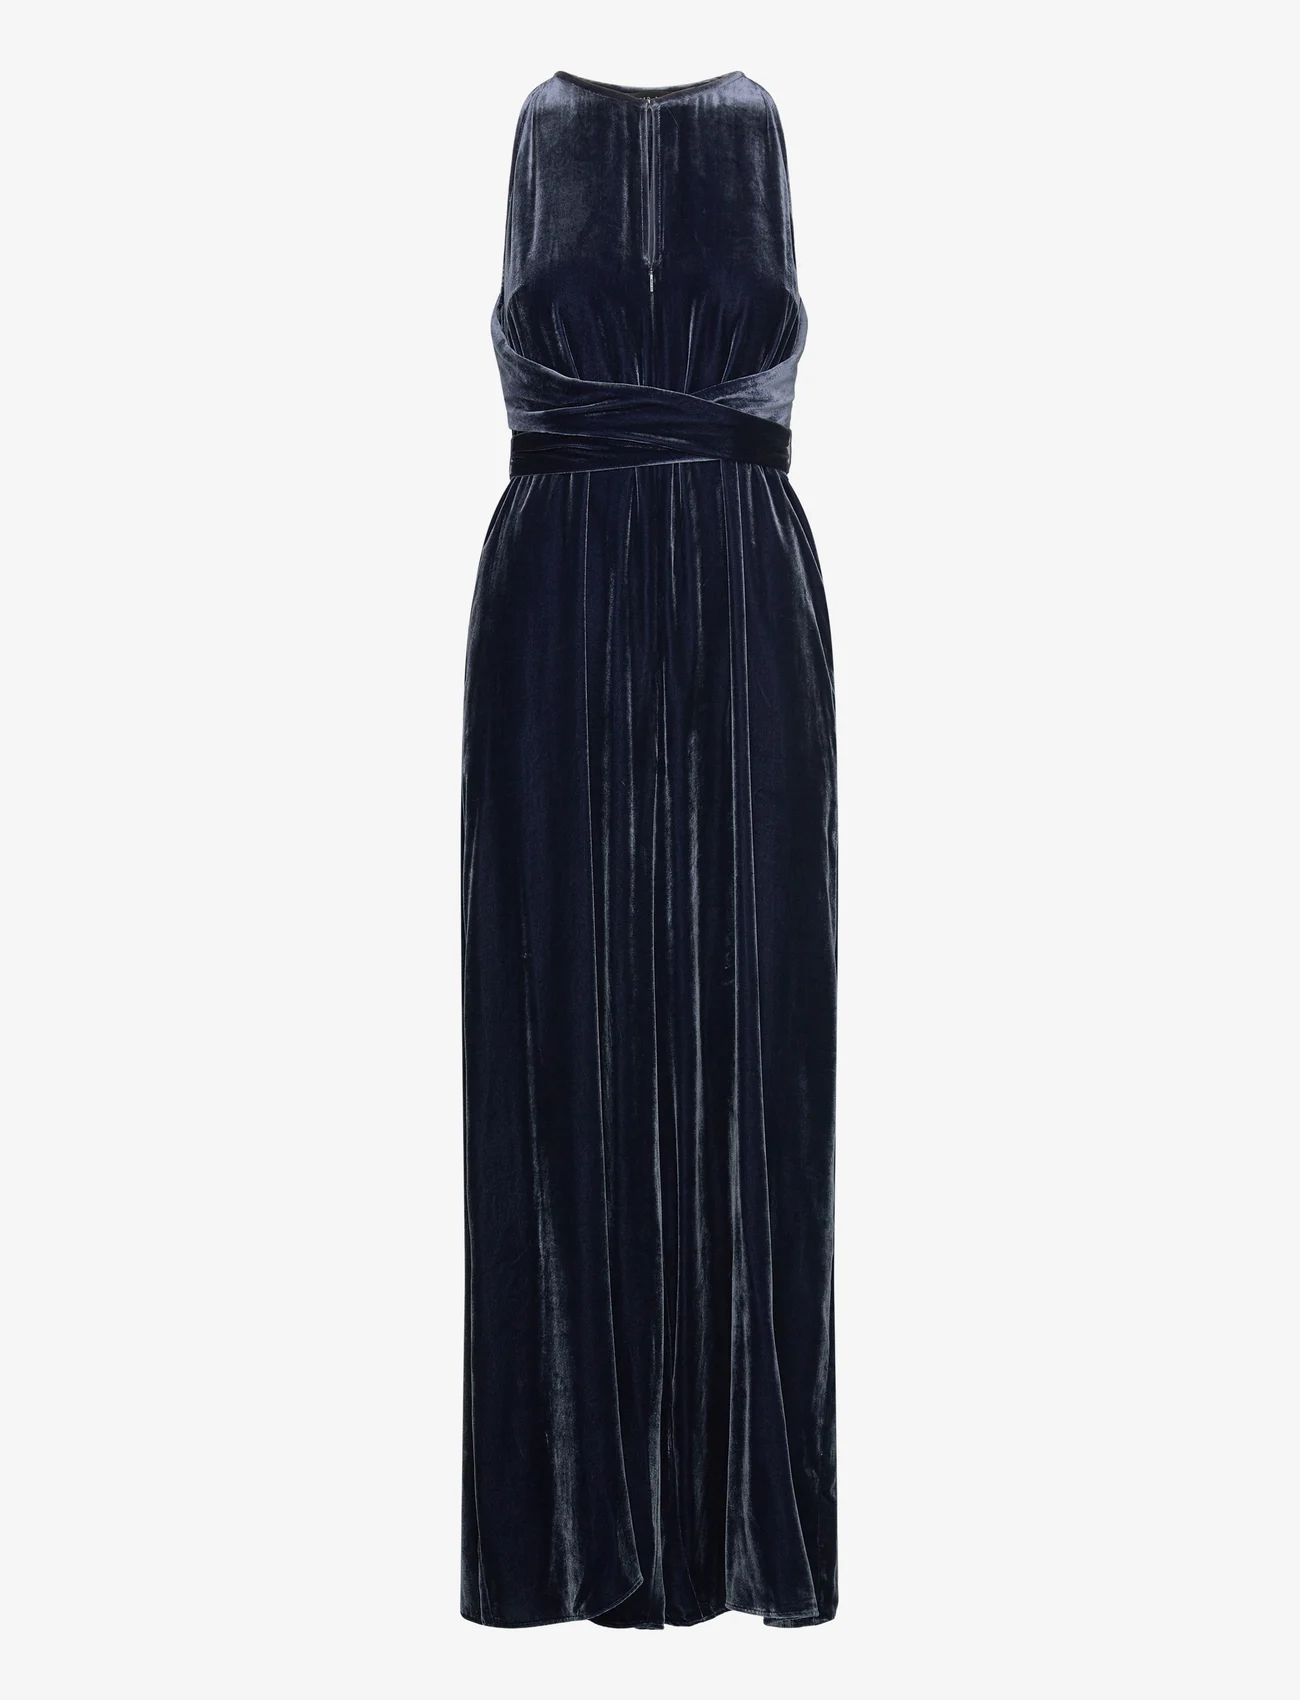 Ted Baker London - LIBBIEY - jumpsuits - 10 navy - 0